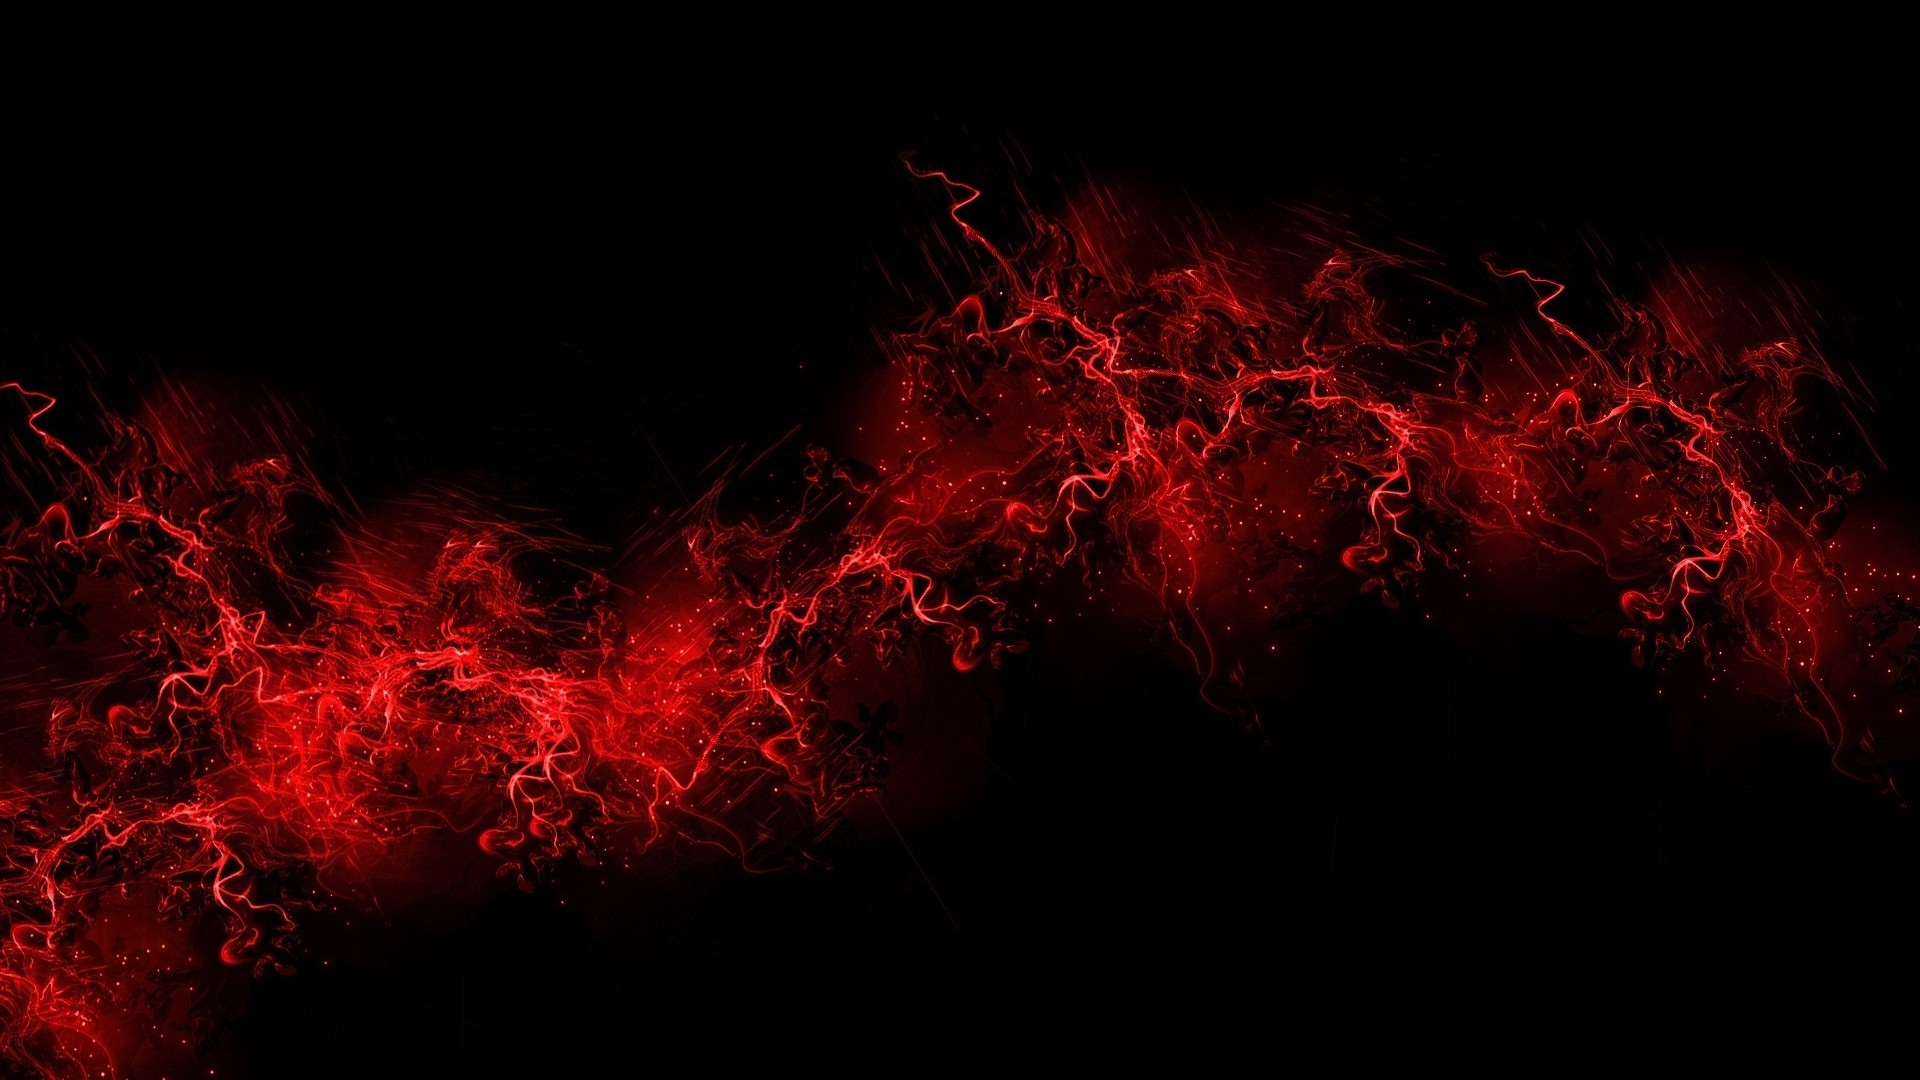 HD background images red and black – Full Hd 1080p Abstract Wallpapers  Desktop Backgrounds Hd inside